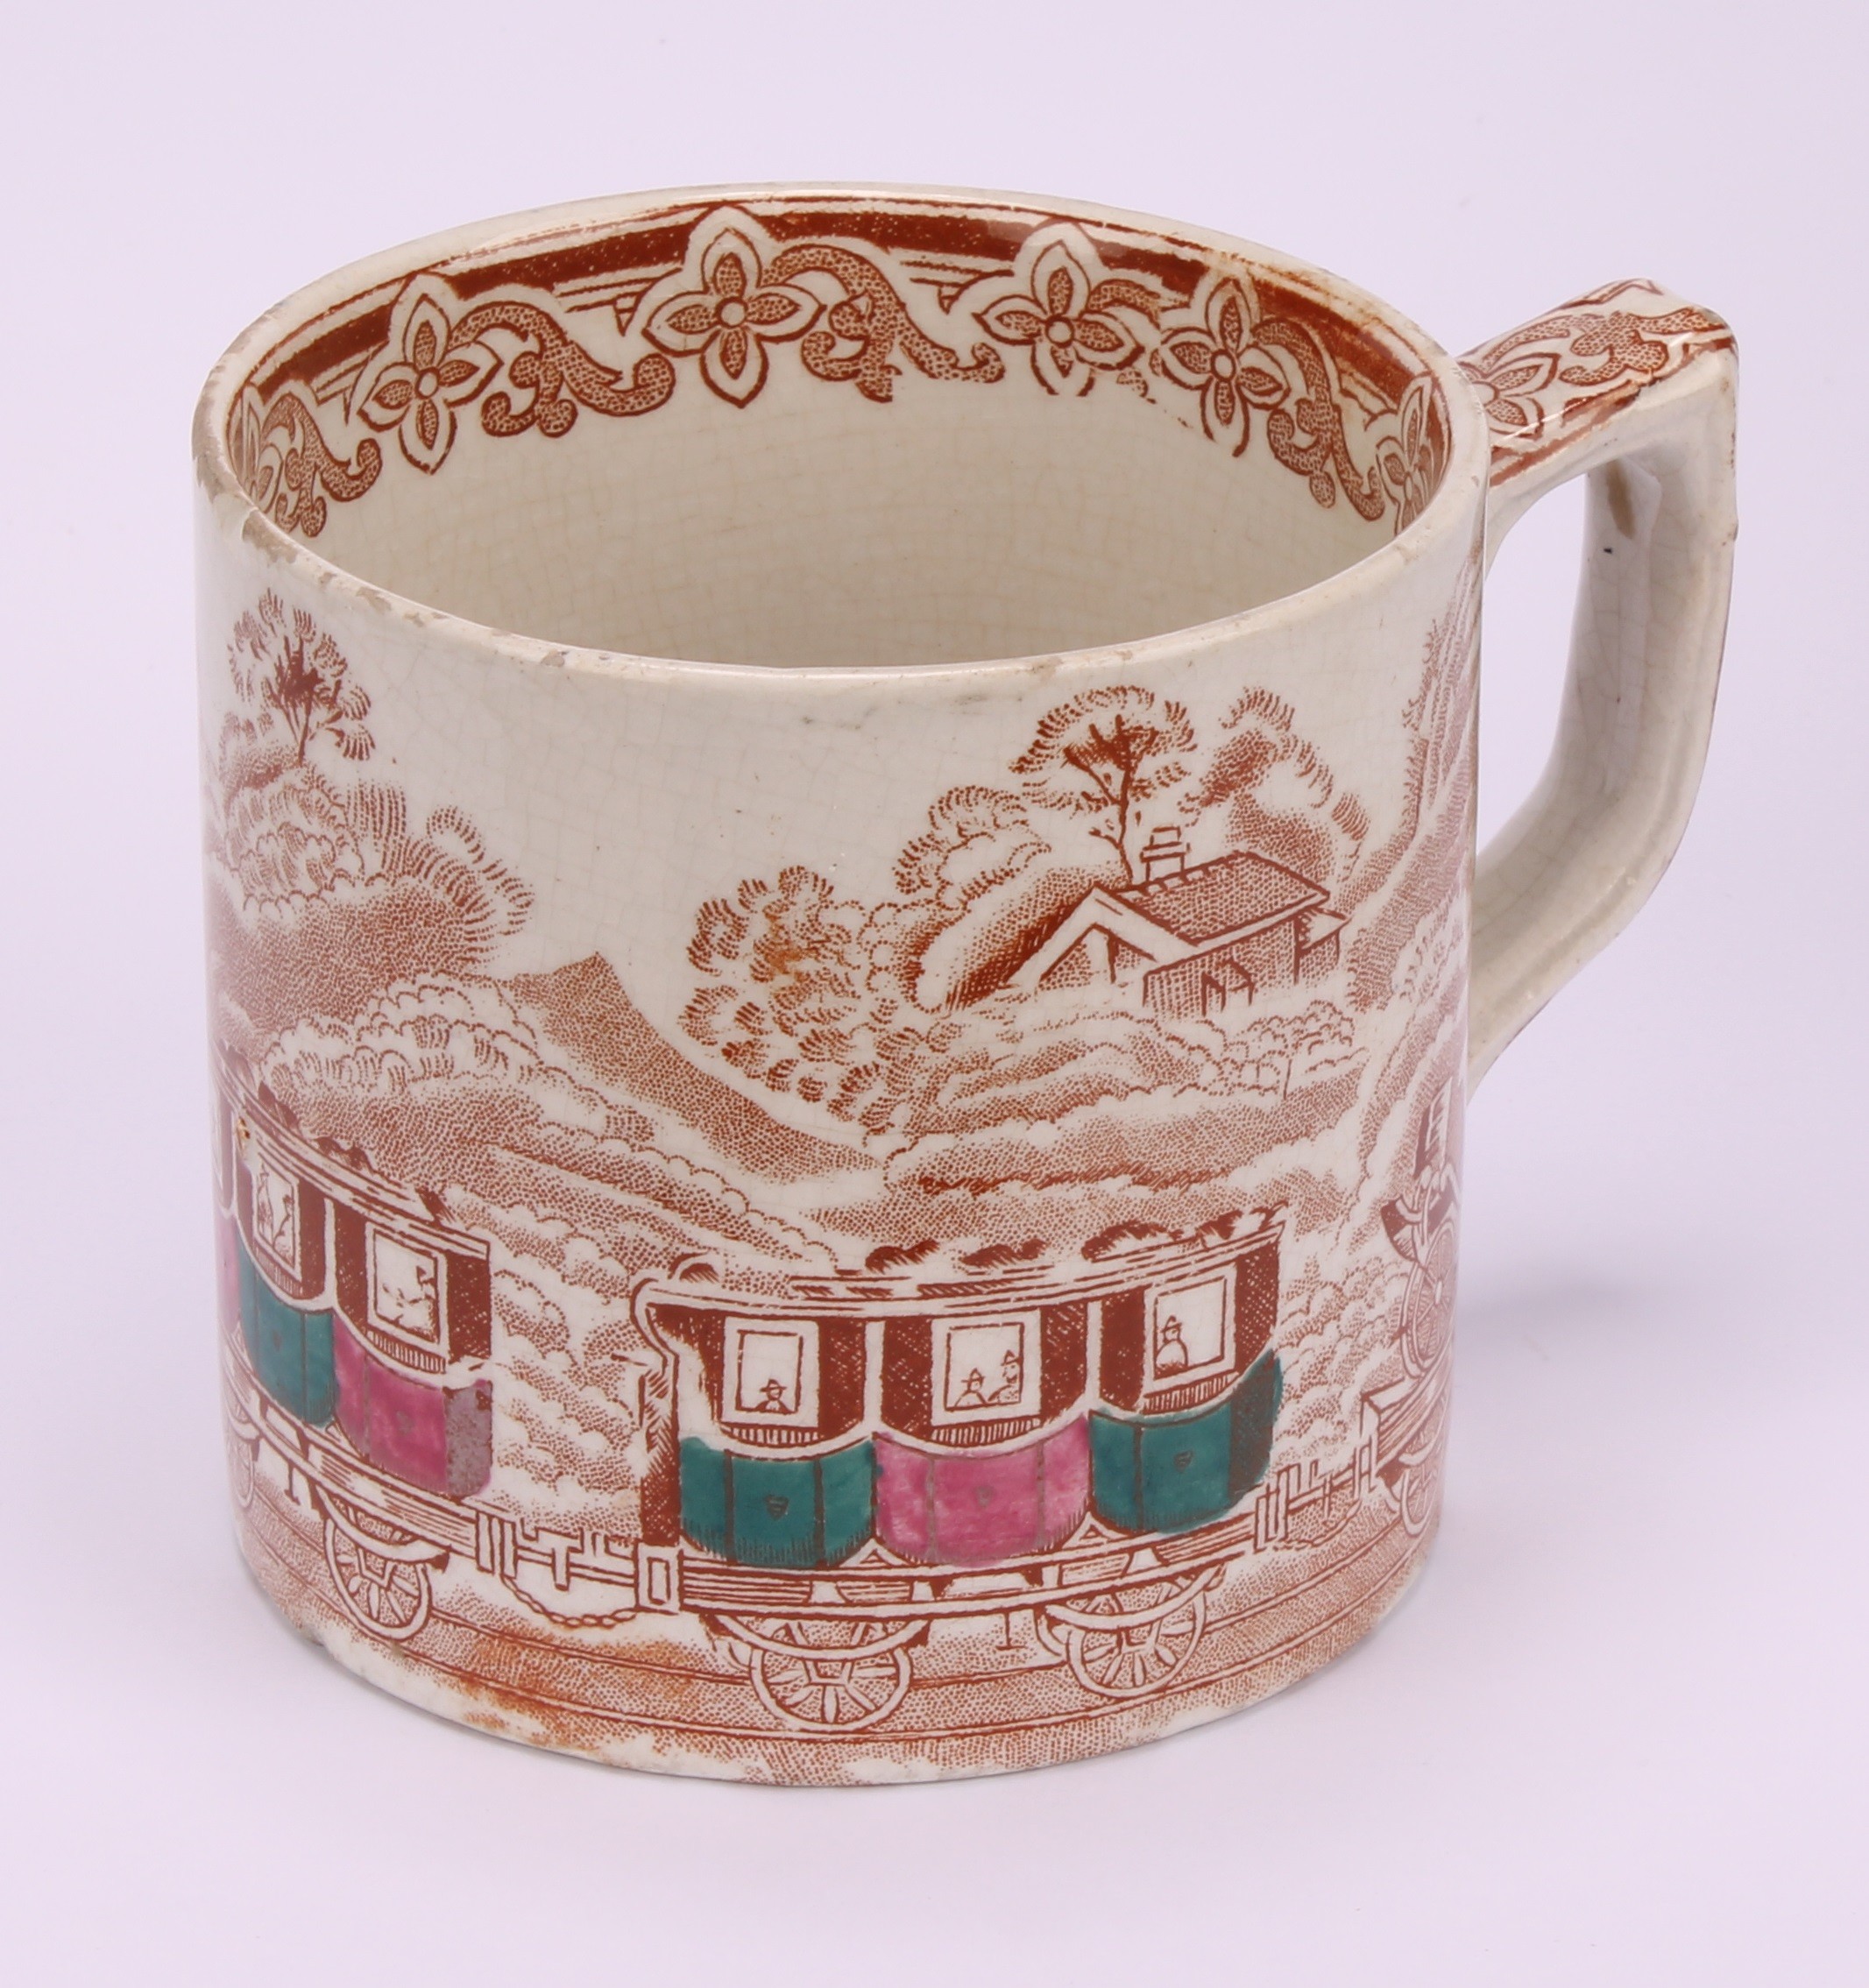 Railway Interest - steam locomotives, a 19th century Staffordshire pearlware mug, printed in sepia - Image 8 of 10